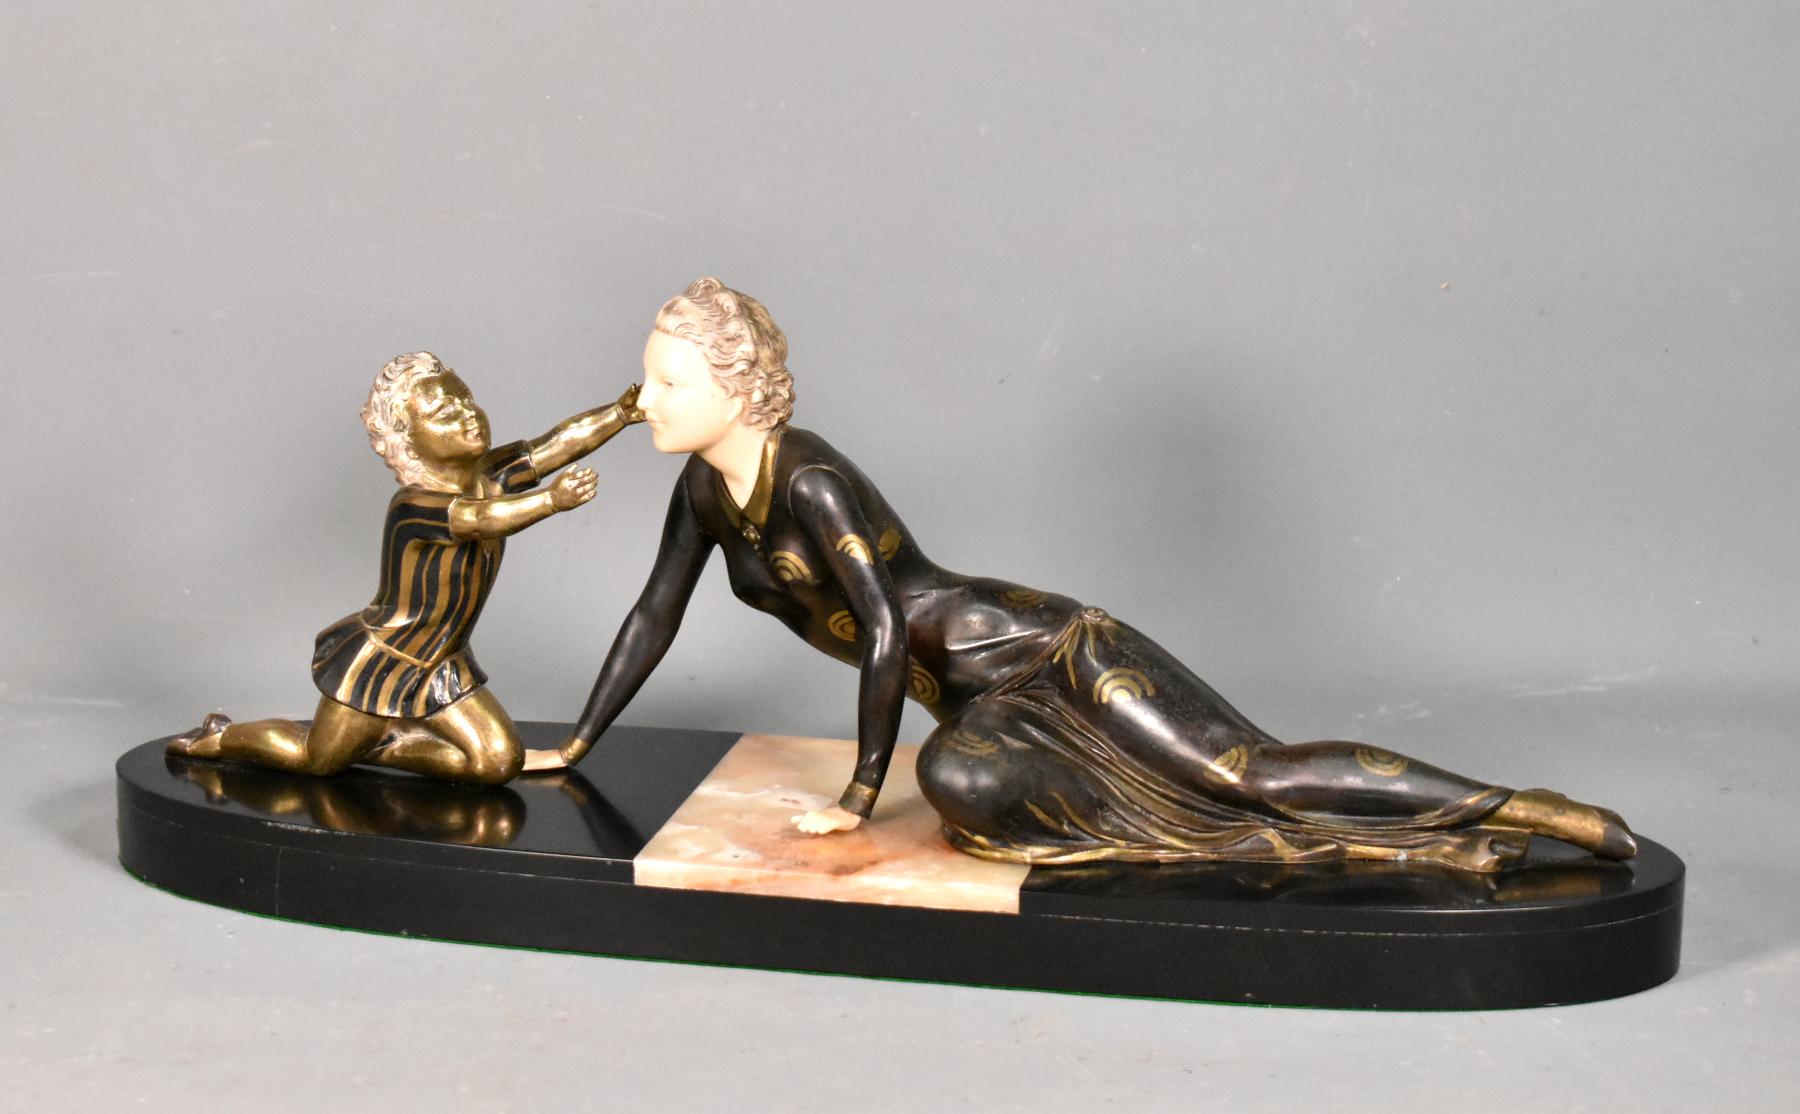 Large French Art Deco Figurative Group by Menneville

This large art deco figural group depicts a reclining woman and a young child and is signed Menneville.

The artist Menneville was a prolific sculptor of Art Deco figurines. He also worked under